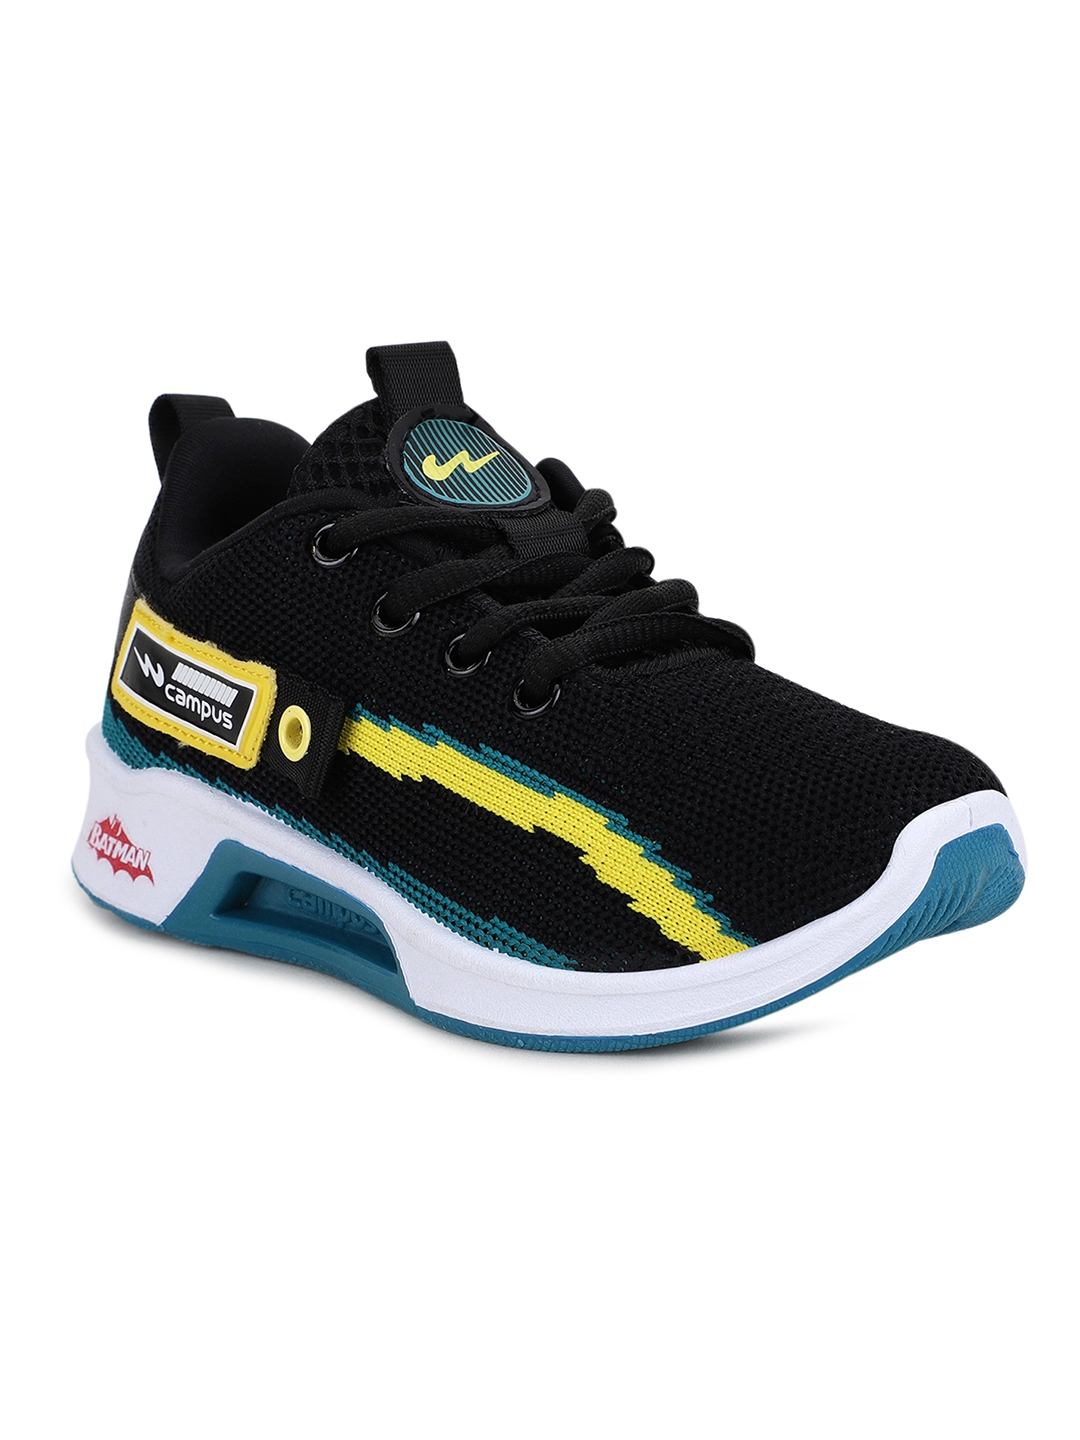 Campus Shoes | Black Hm-501 Running Shoes